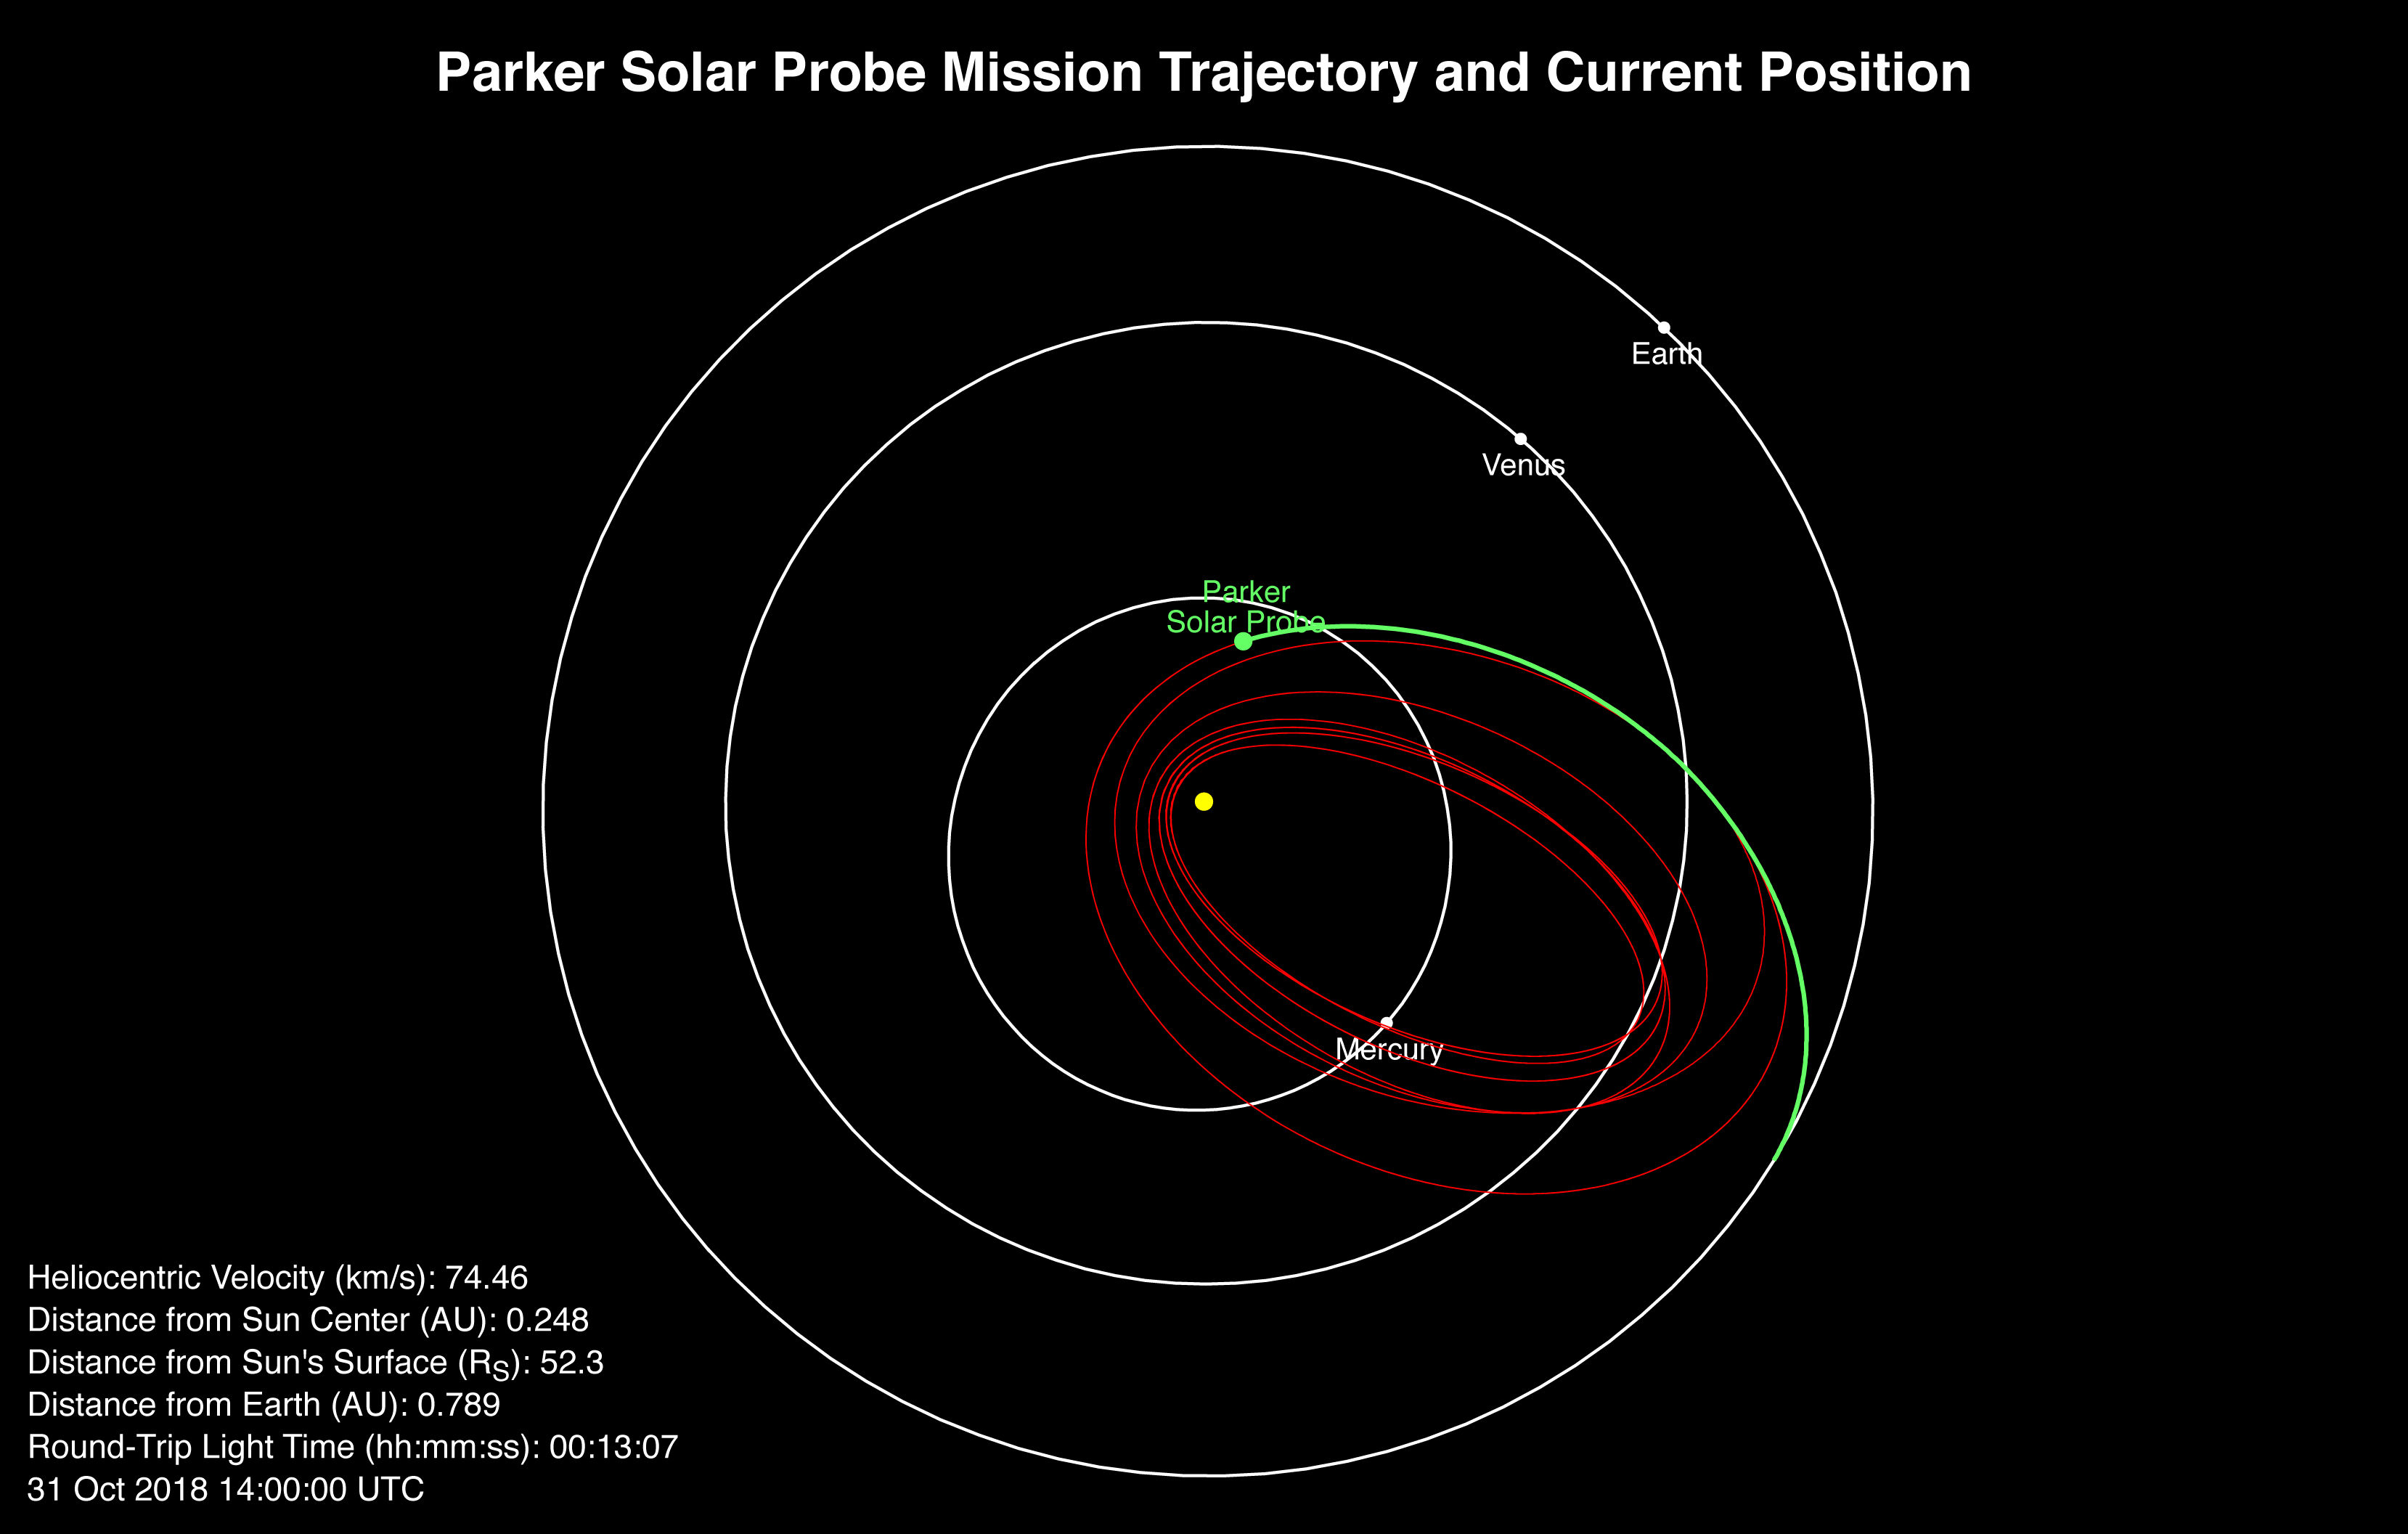 The journey of the Parker Solar Probe as of the 31 October 2018. Image: NASA